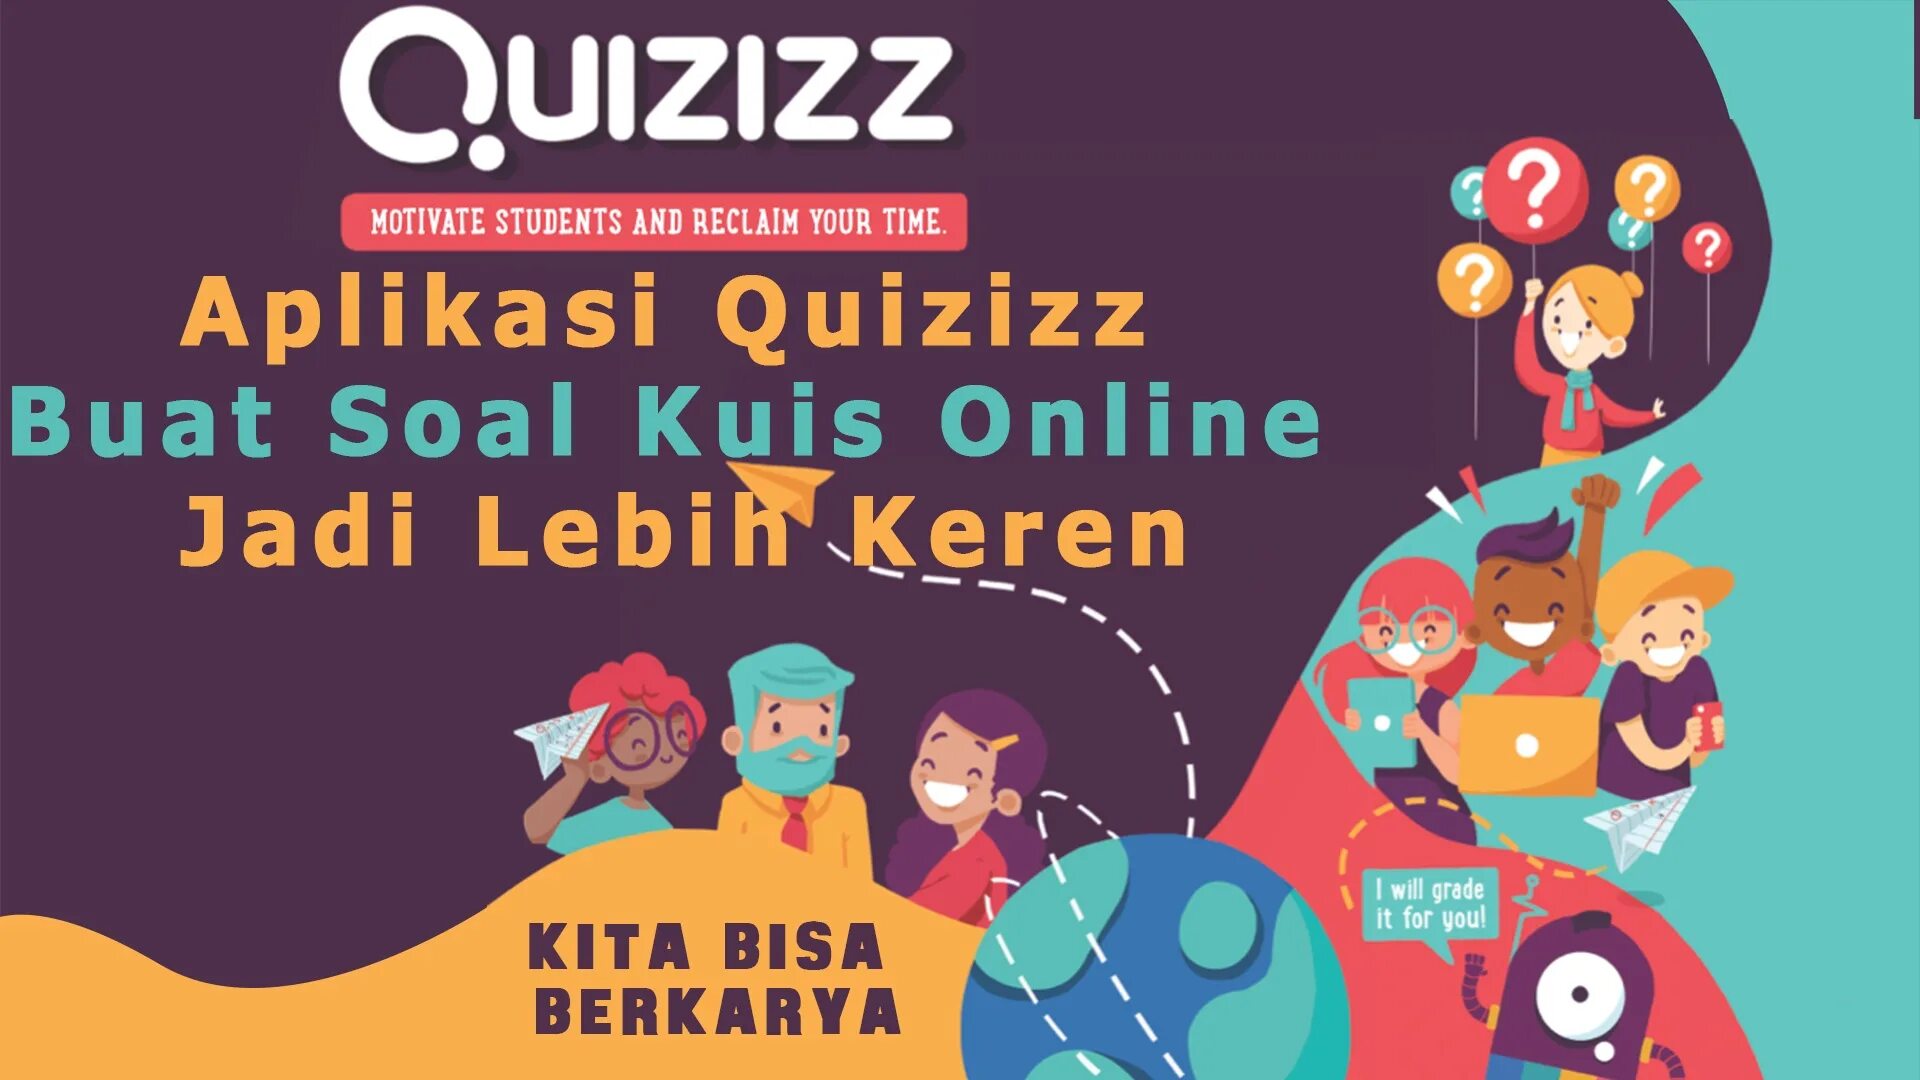 Quizizz quiz. Quizizz. Quizizz time. Quizizz фото. Quizizz for students.